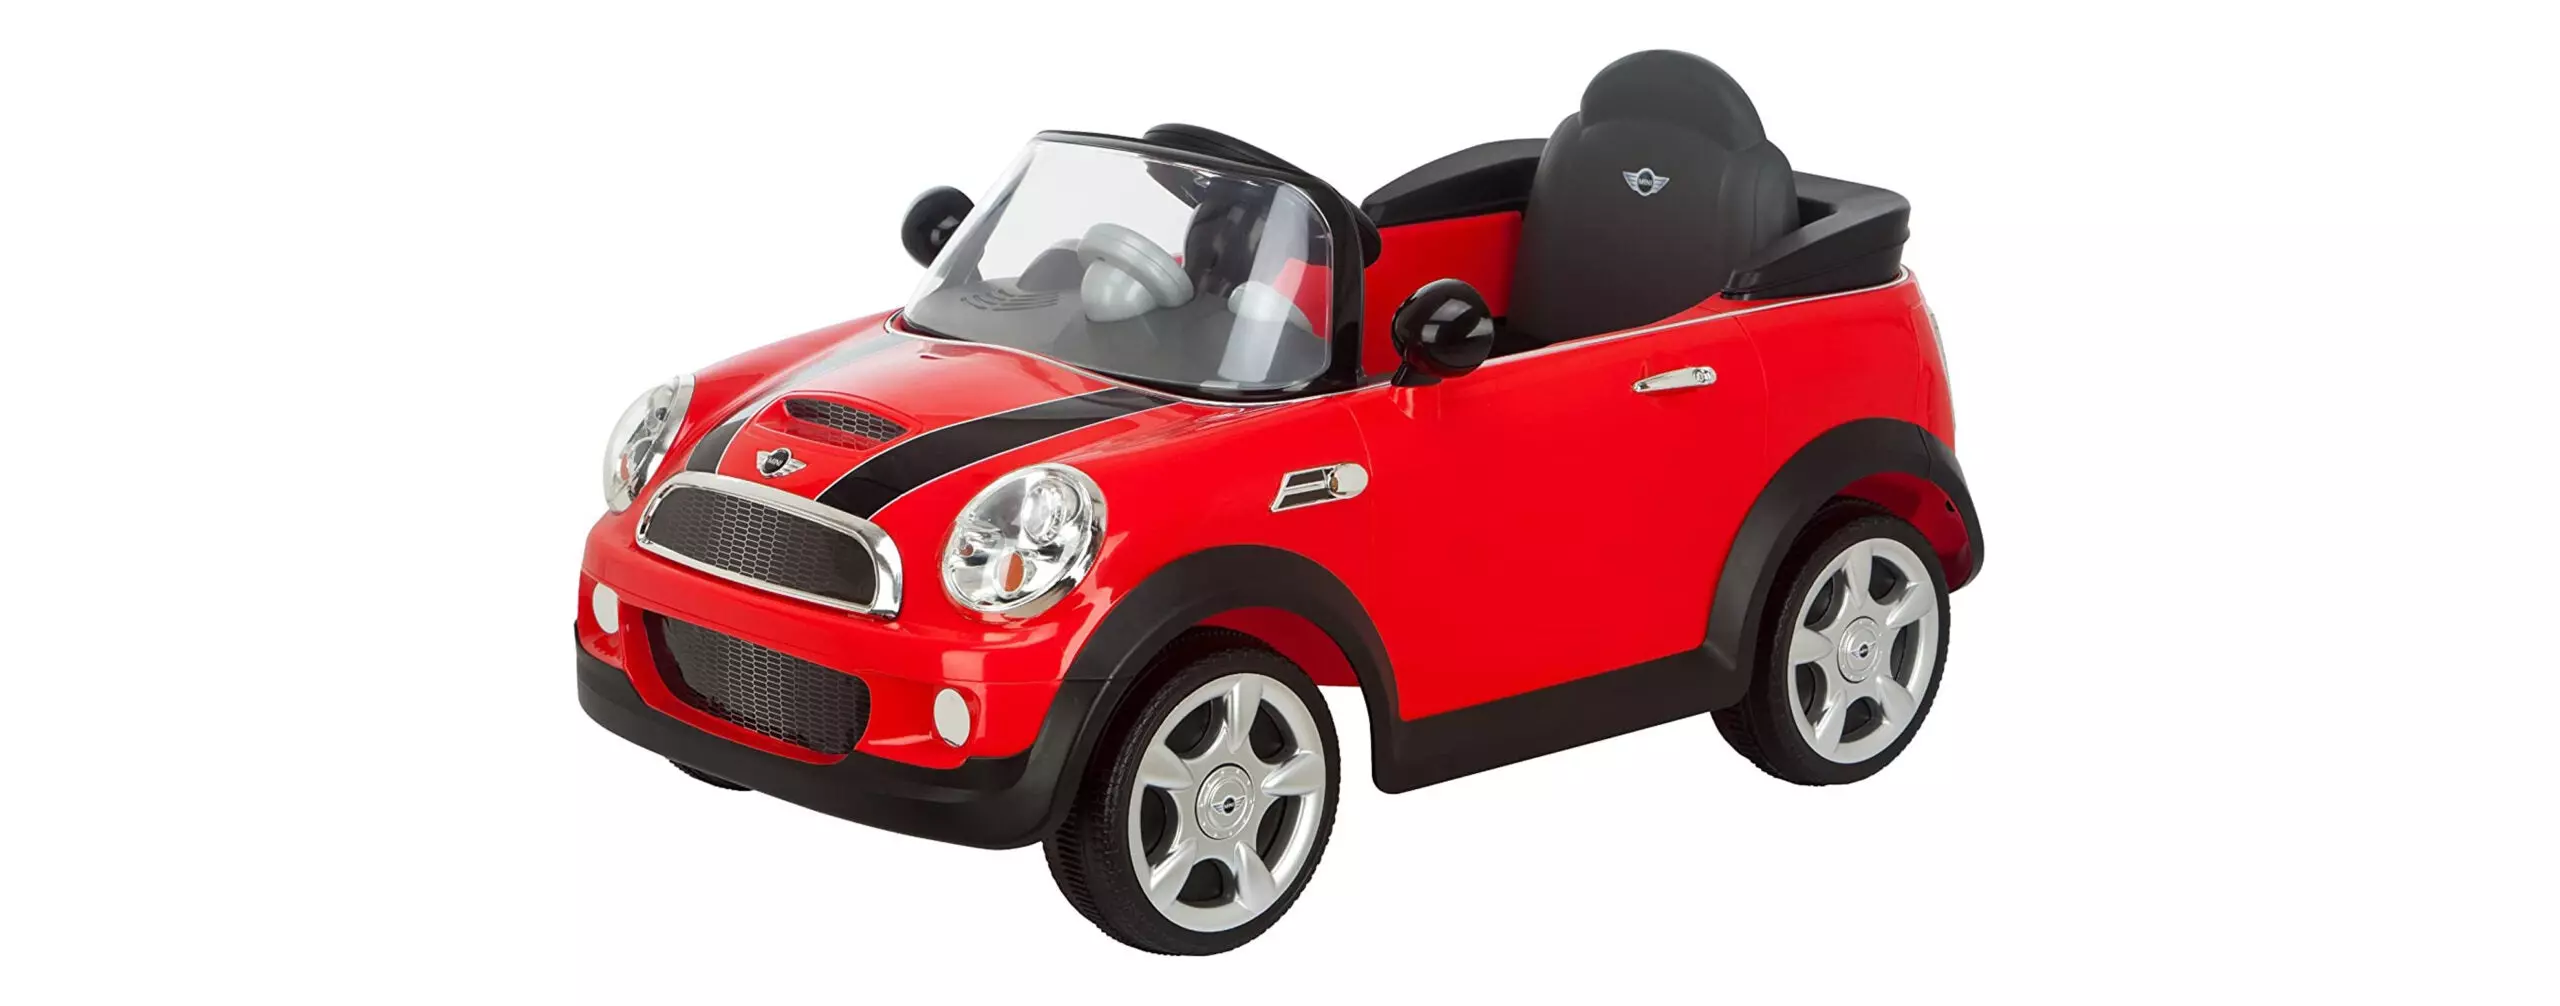 The Best Electric Car For Kids (Review & Buying Guide) in 2022